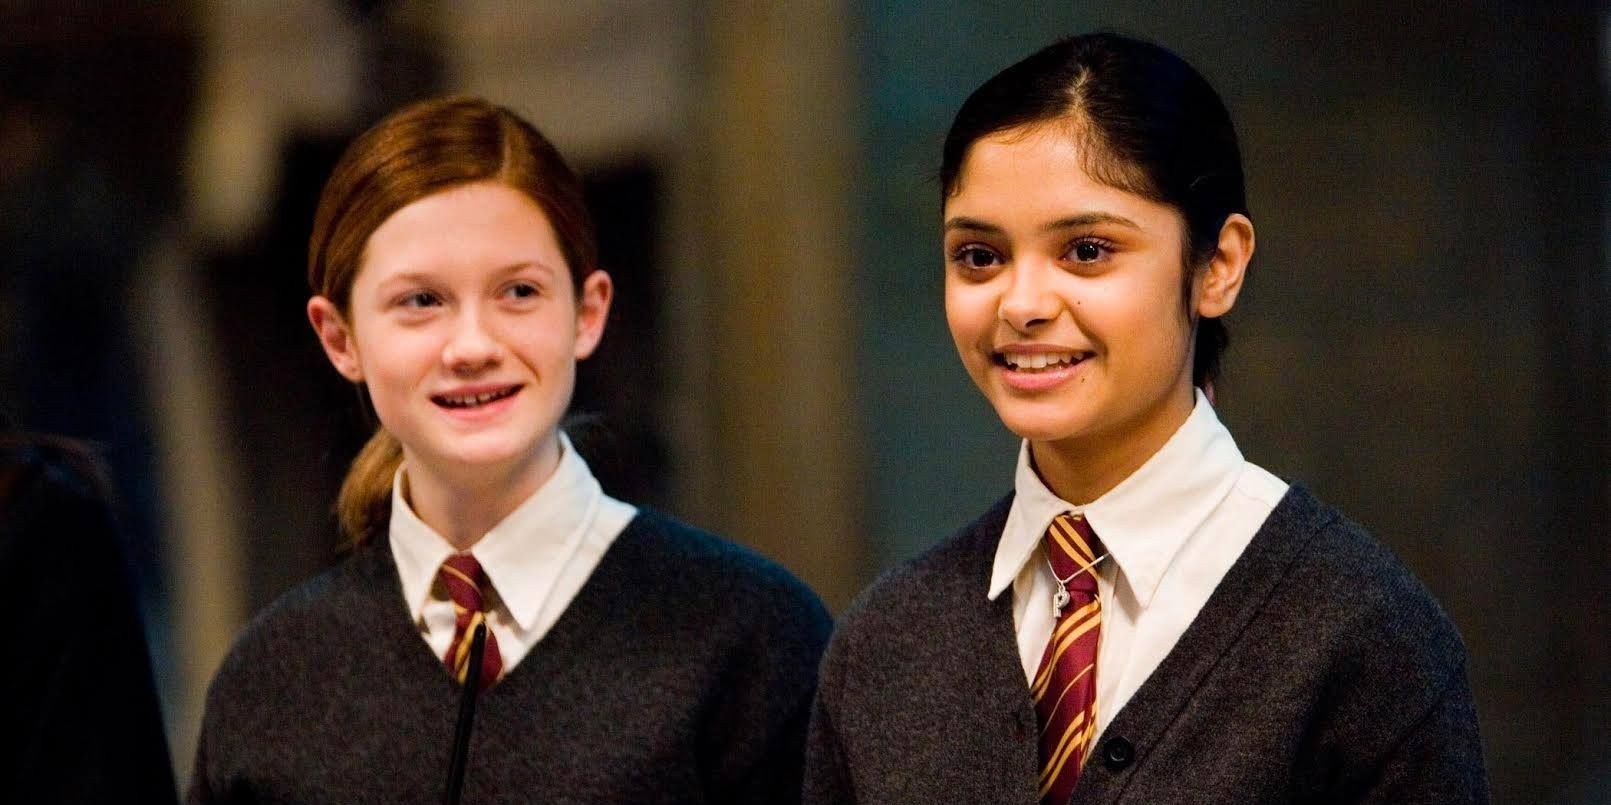 Padma Patil and Ginny Weasley in Harry Potter standing side by side and smiling.